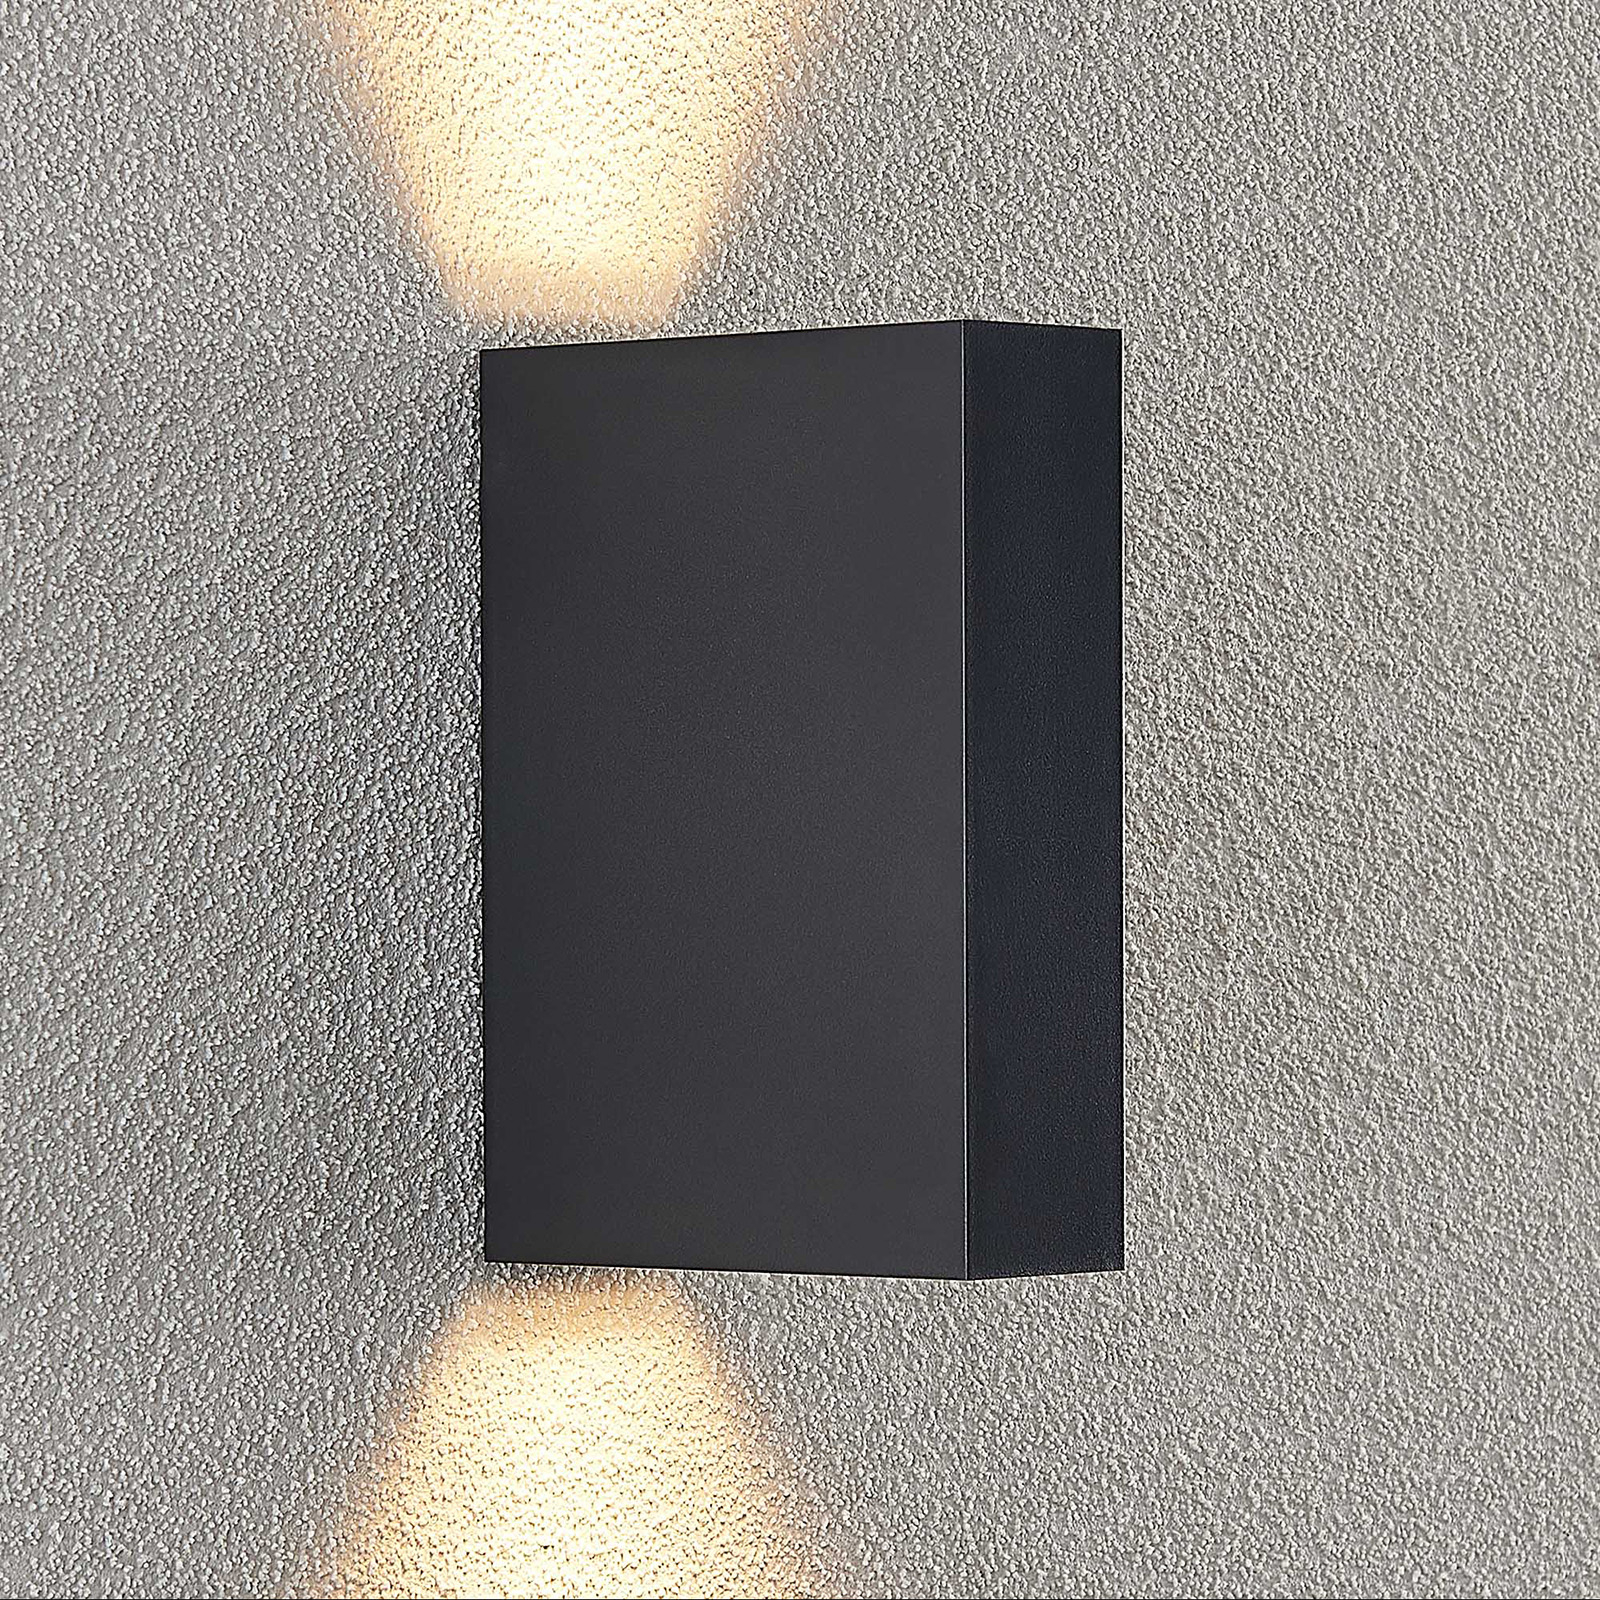 Lindby Ugar LED outdoor wall light, 4.8 cm up/down